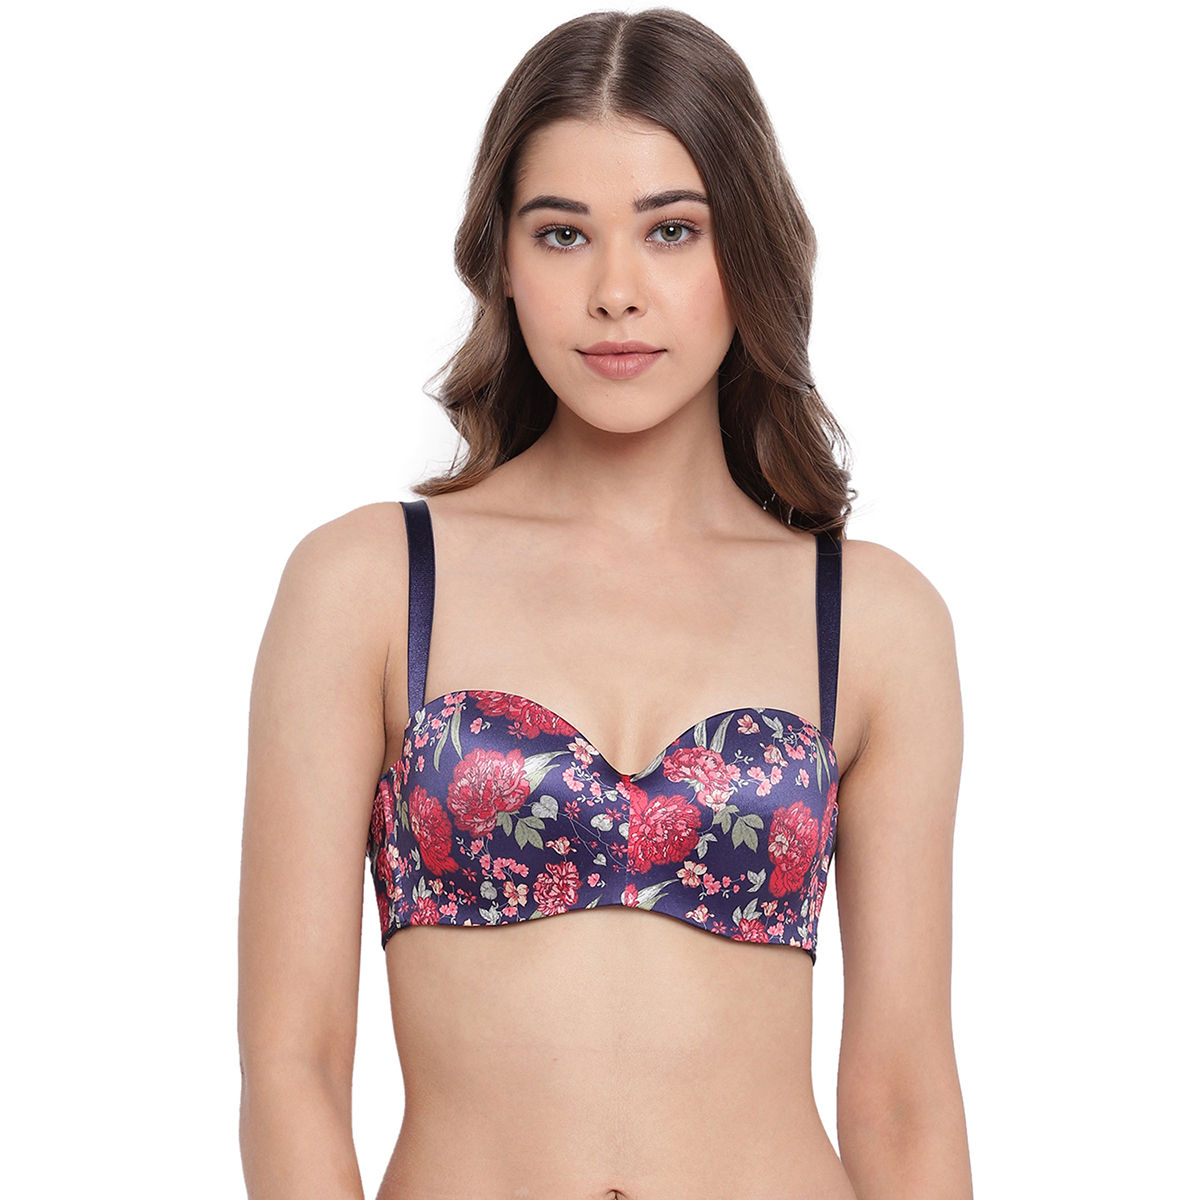 Nykaa - Confidence is sexy! 💯 Sporty or sensuous, what is your pick? ⚽💃🏻  ⭐ Enamor F074 Strapless T-Shirt Bra Full Support, Padded & Wired: Rs.1299 ⭐  Enamor F023 T-Shirt Bra Padded